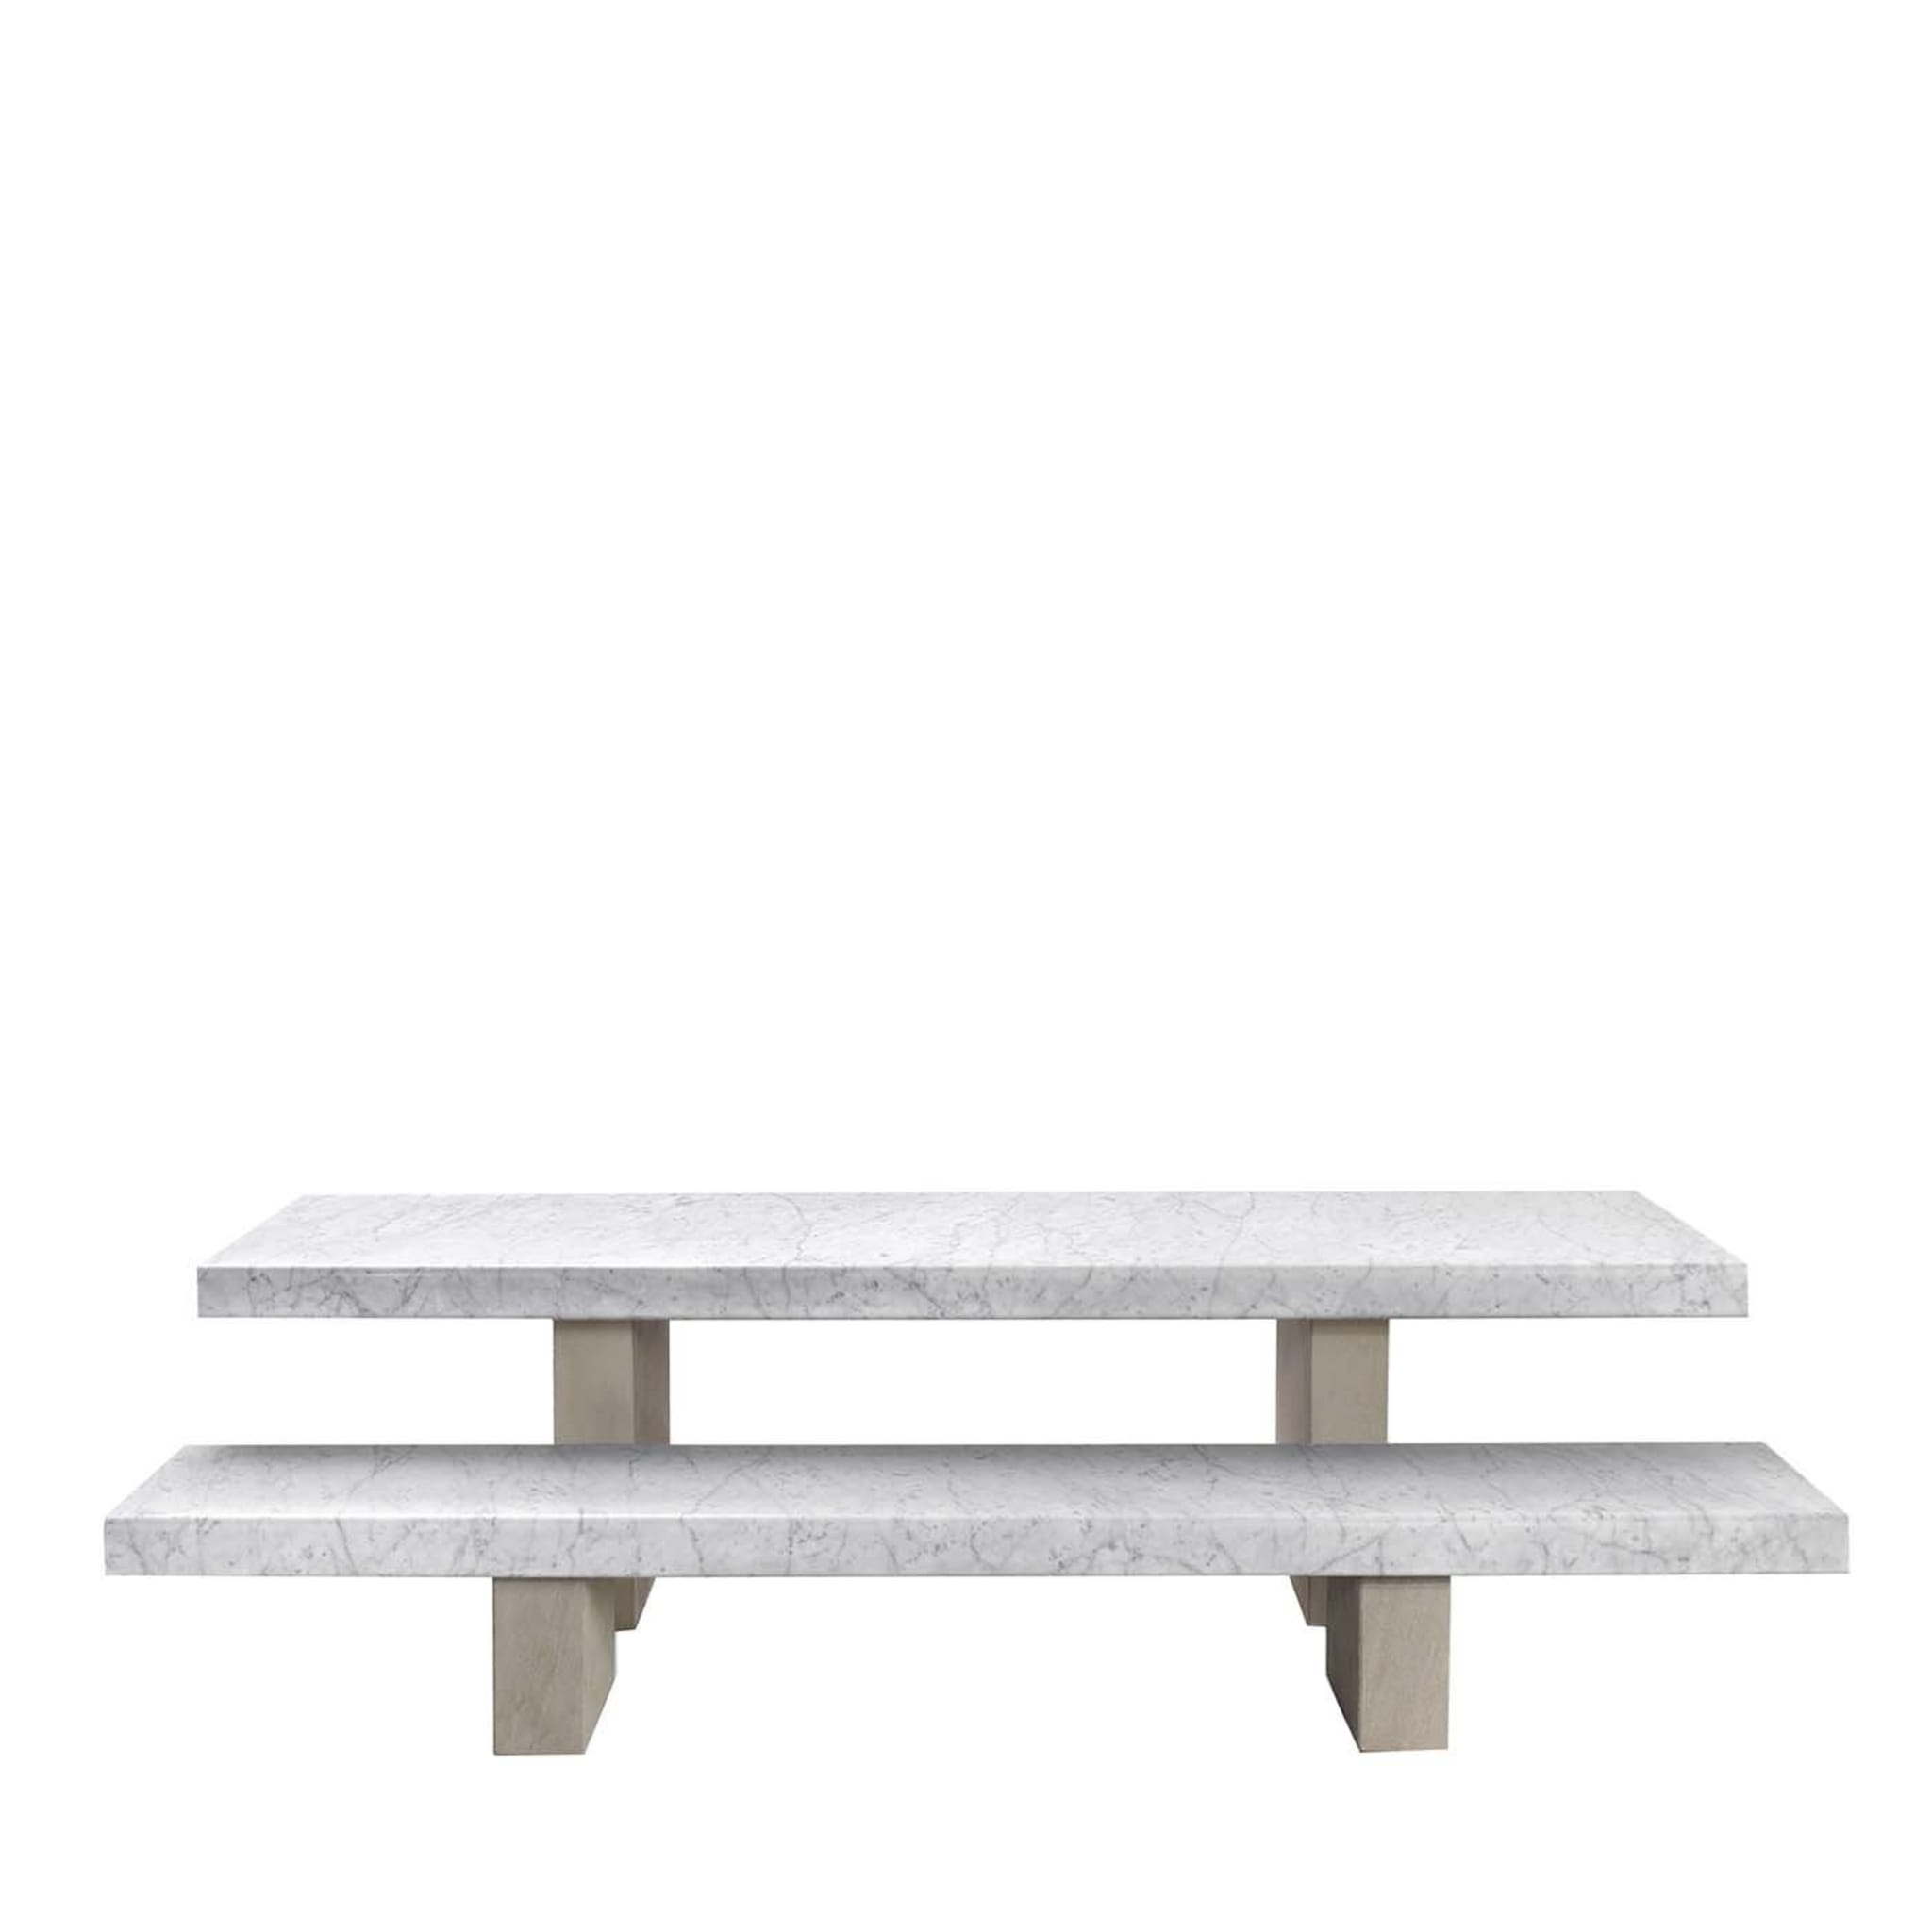 Span Outdoor Rectangular Dining Table by John Pawson - Alternative view 2